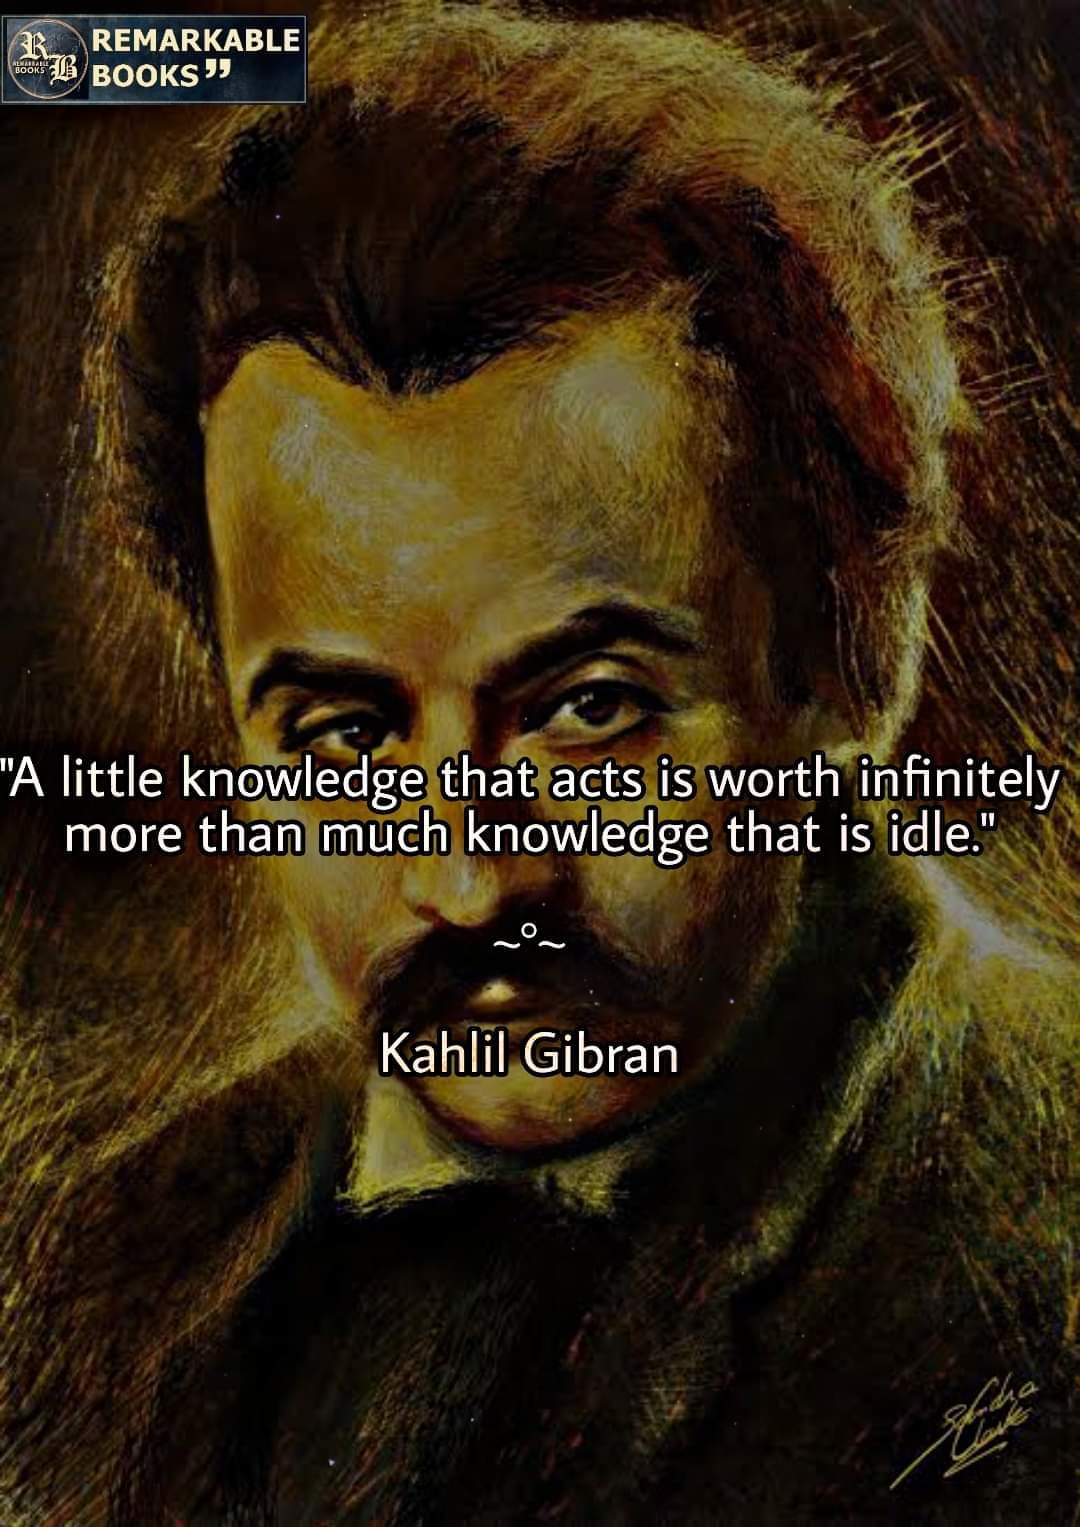 A little knowledge that acts is worth infinitely more than much knowledge that is idle. Khalil Gibran